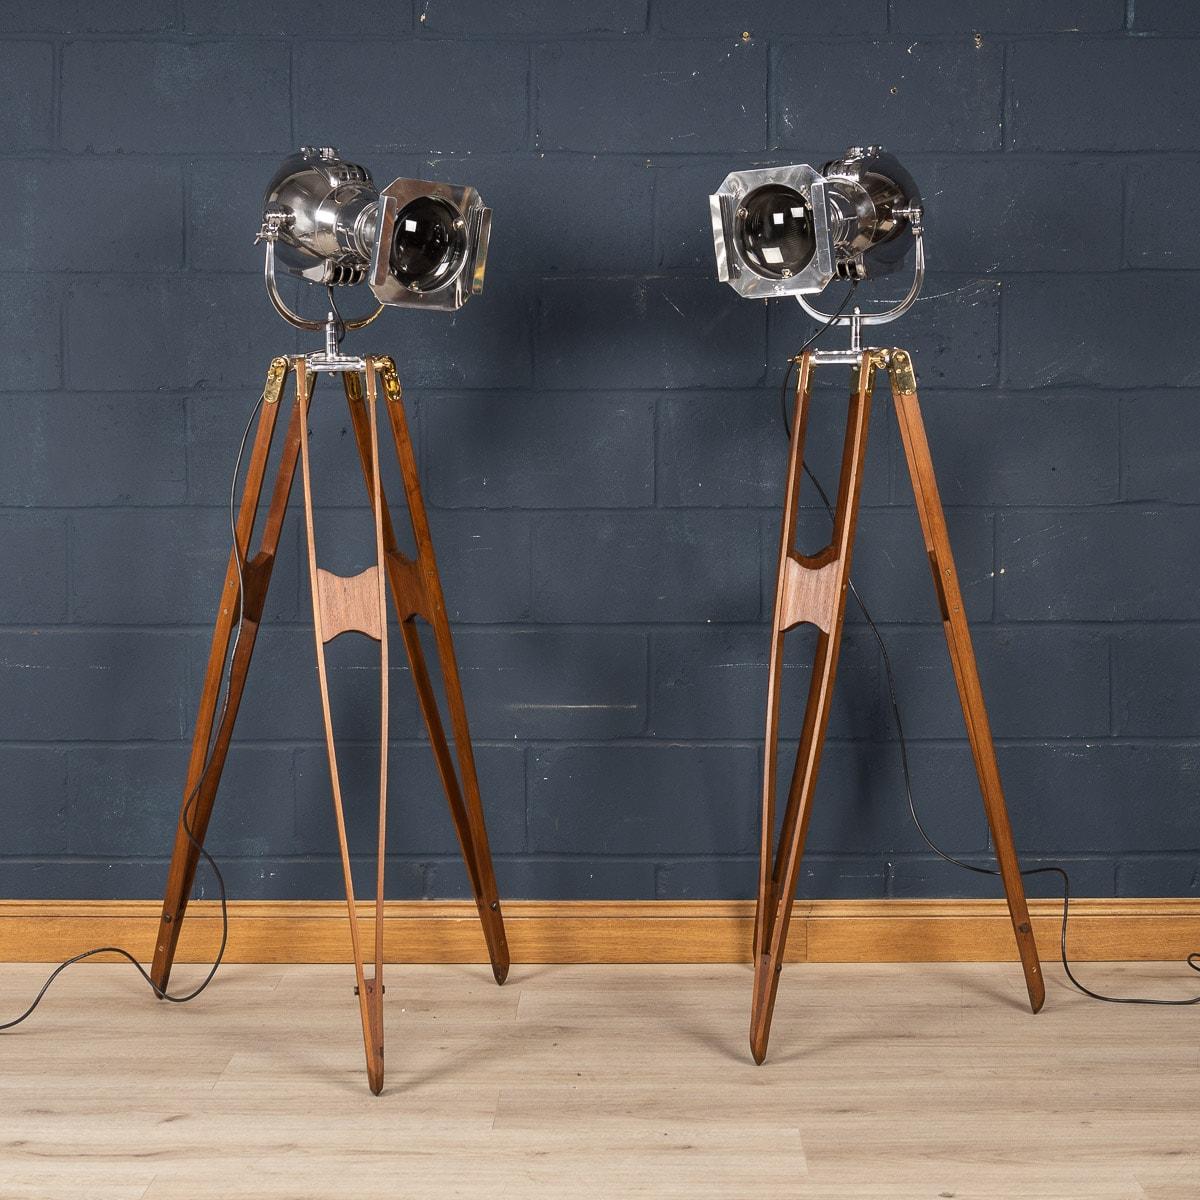 One of the most elegant lighting solutions available on the market, these mid 20th century theatre lamp made by 